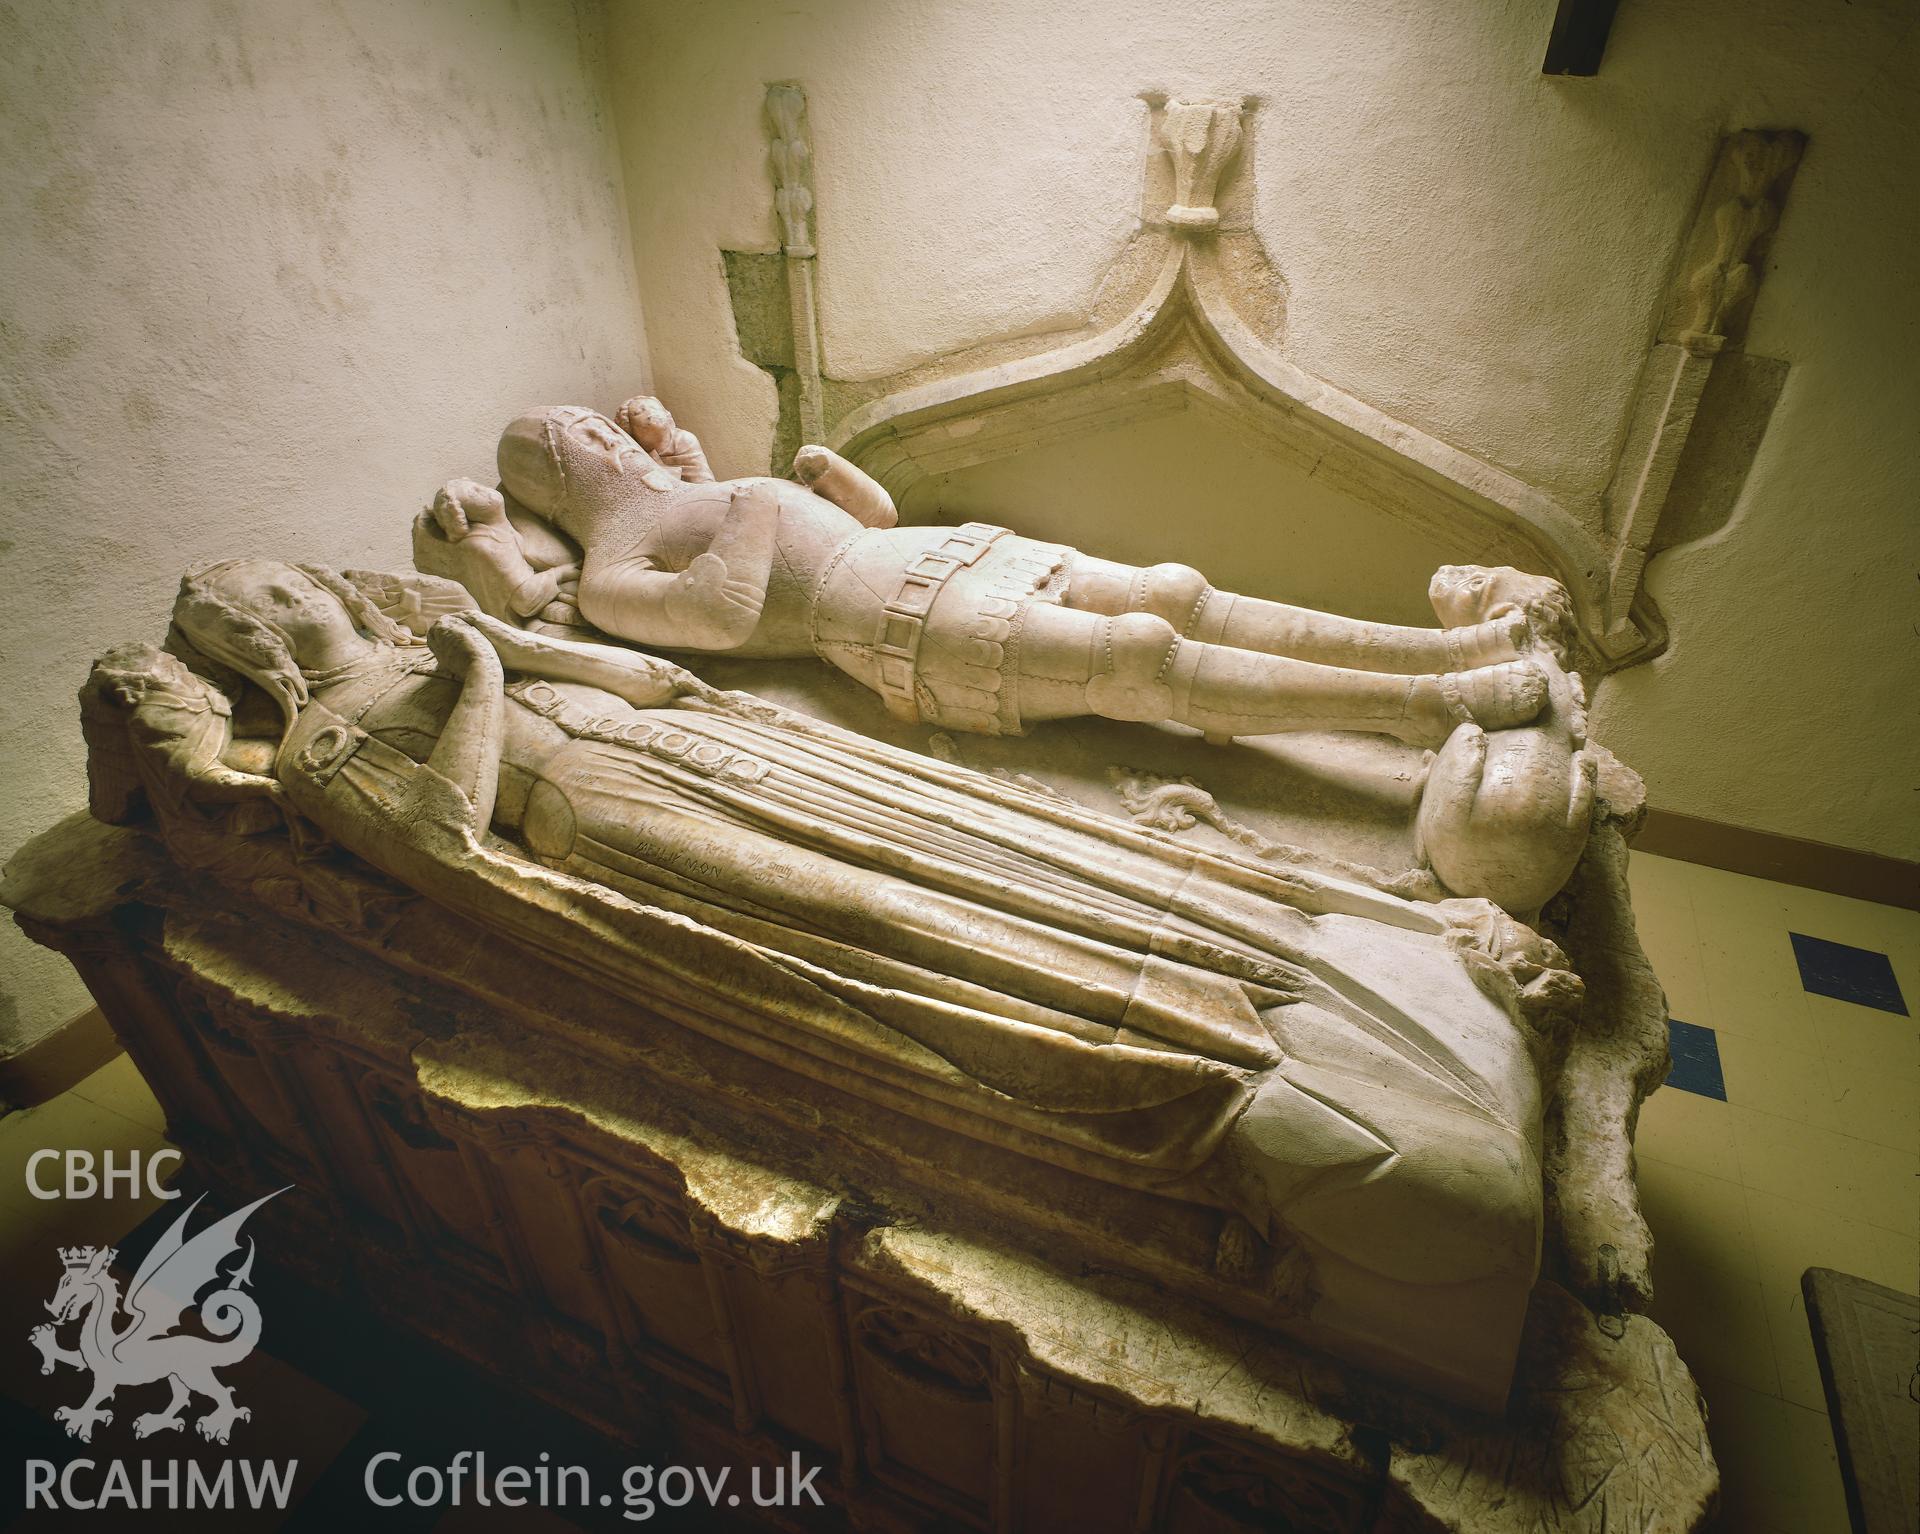 RCAHMW colour transparency showing view of an alabaster tomb in St Gredifael's Church, Penmynydd.